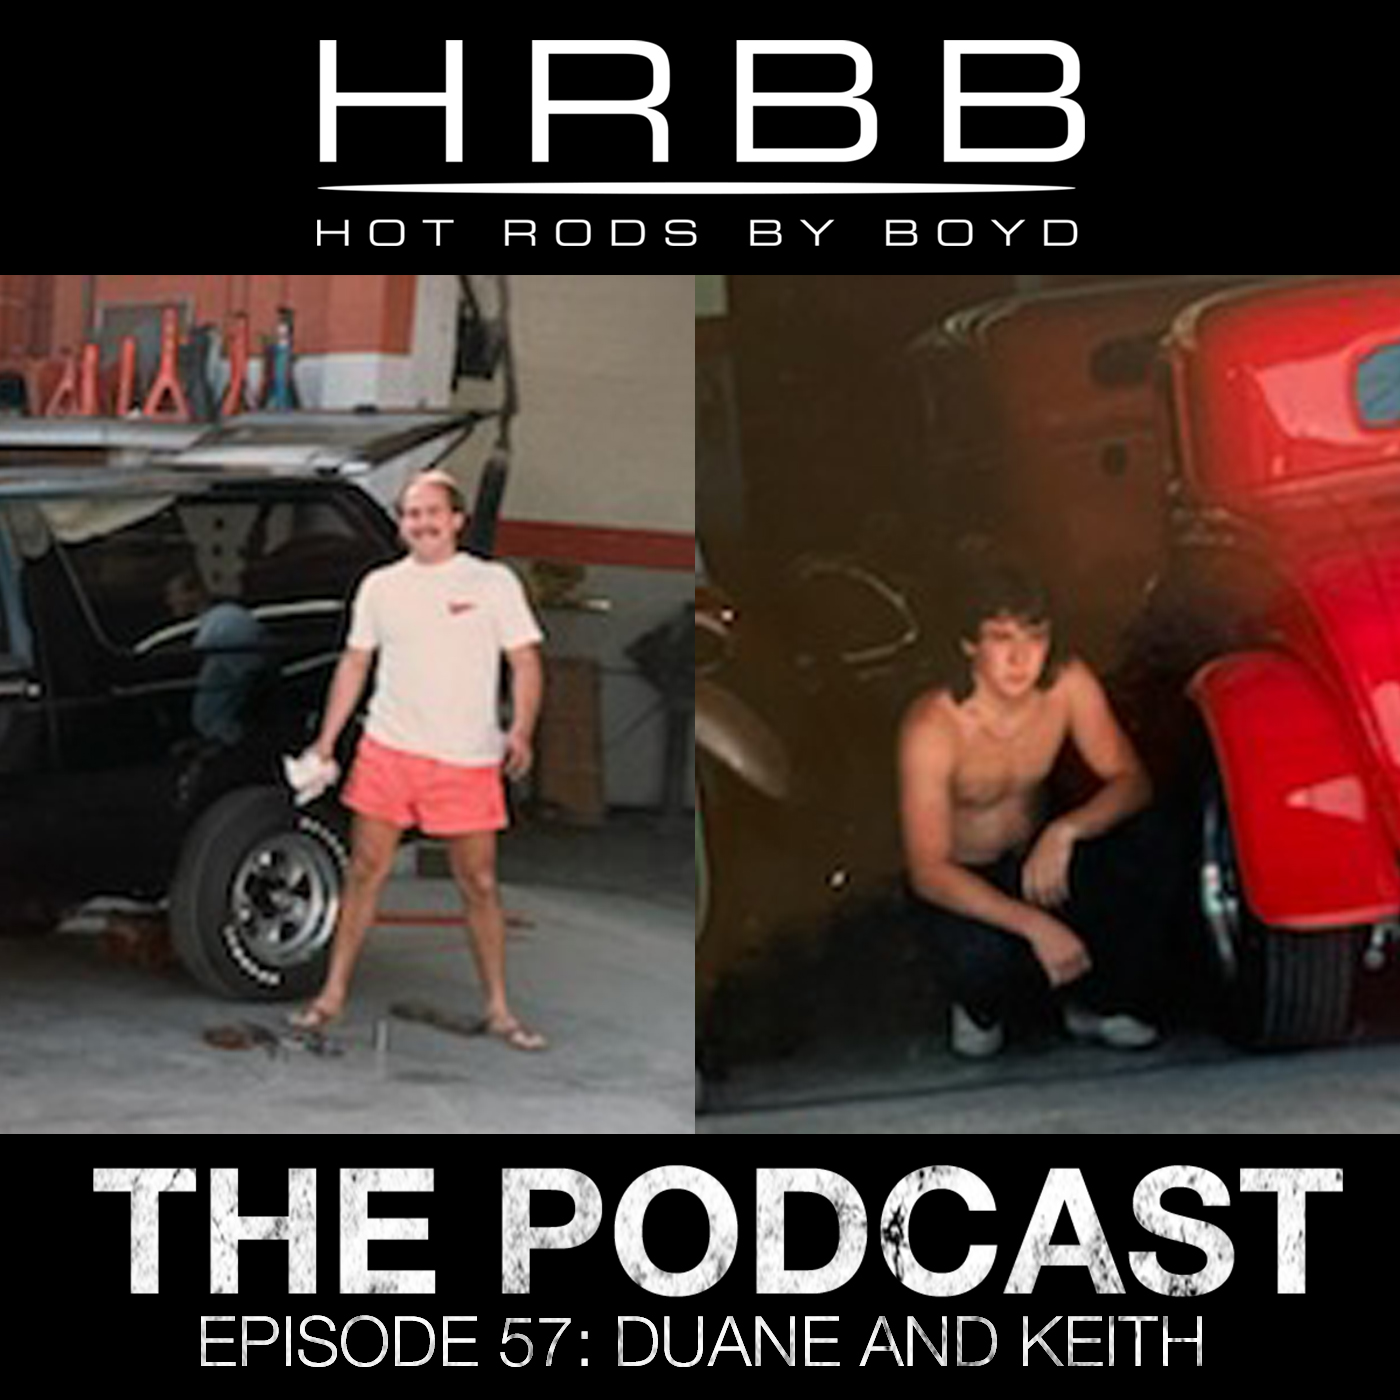 HRBB Podcast Ep 57 - Duane and Keith